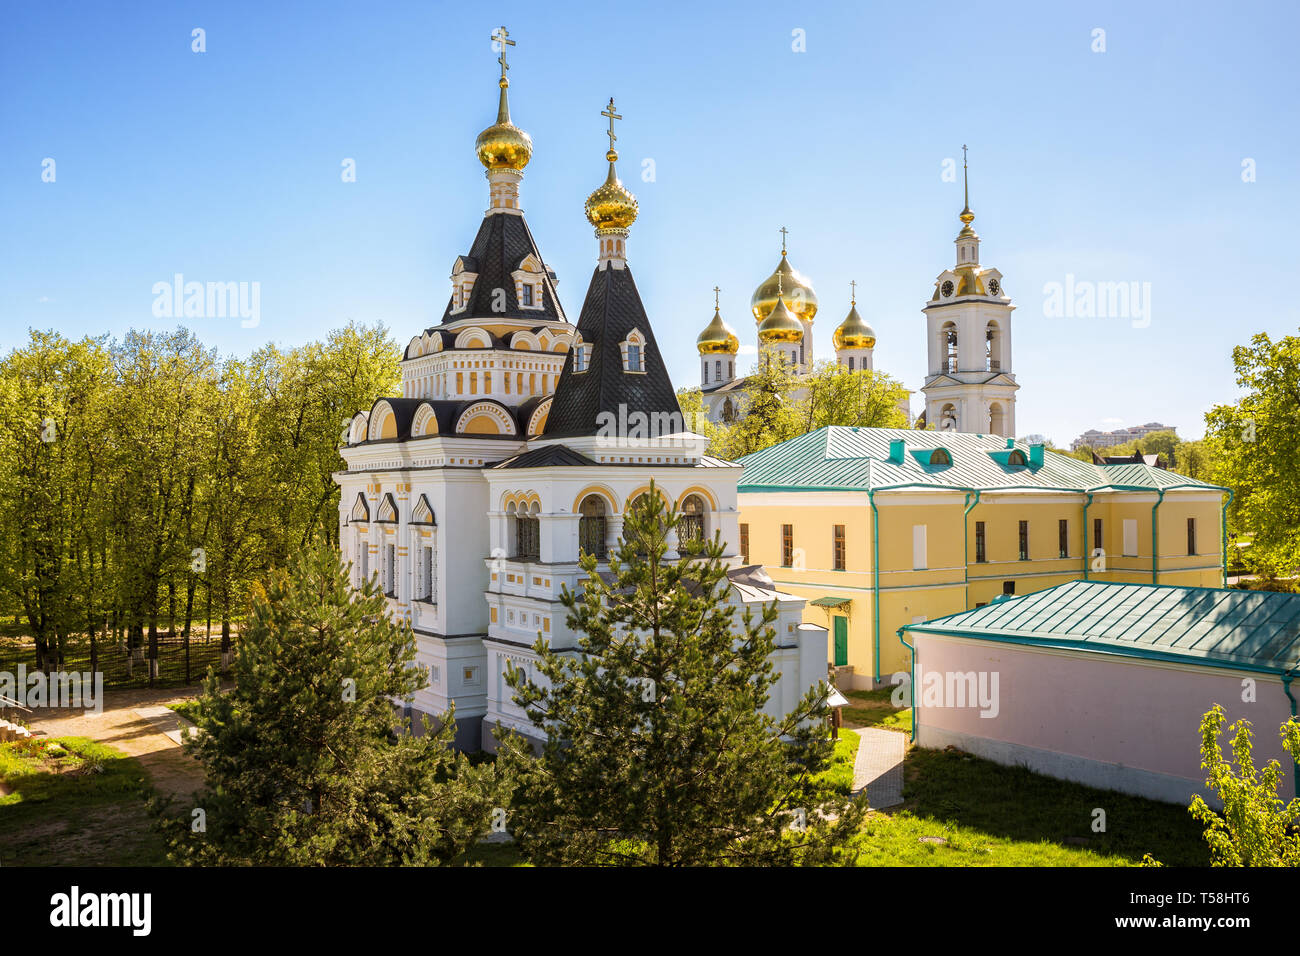 Elizabethan Church and Assumption Cathedral in the Kremlin of ancient Russian city of Dmitrov, Moscow Region, Russia Stock Photo